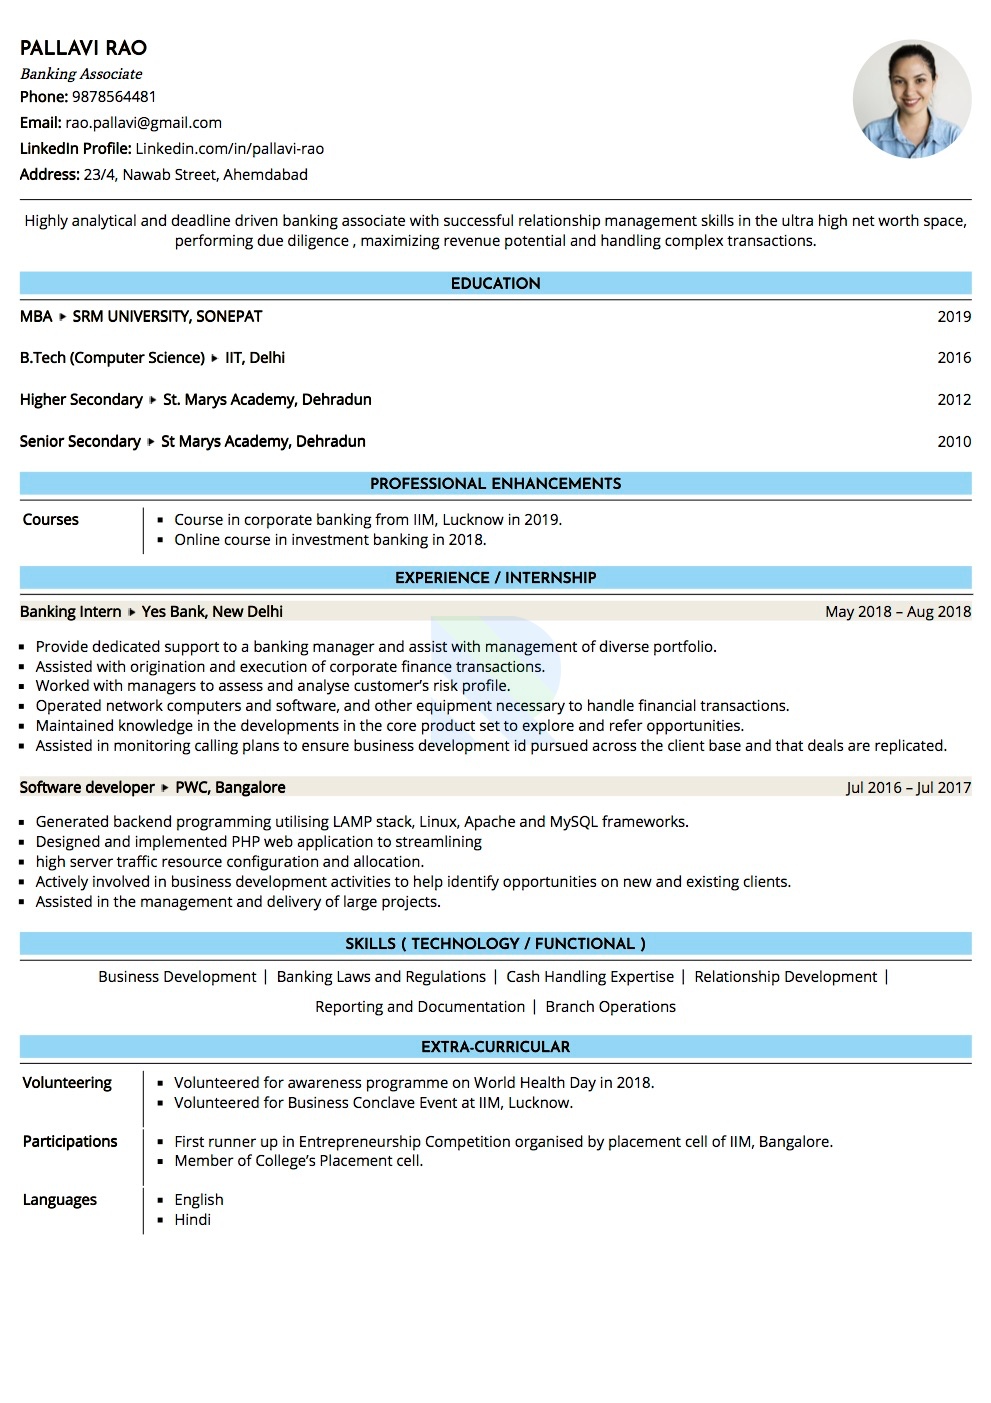 Resume writing services 2019